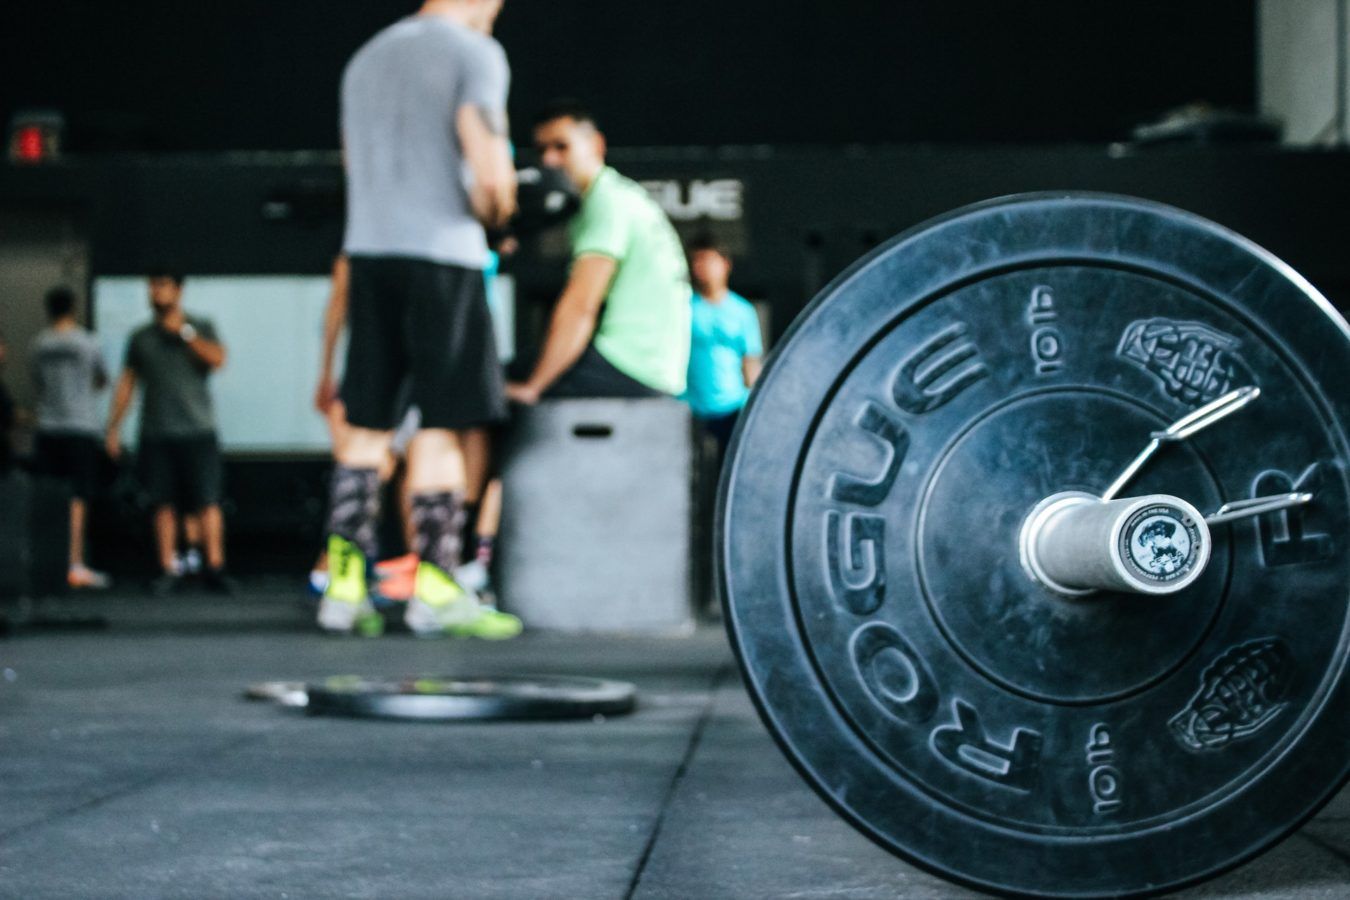 Here’s how you can benefit from resistant training, according to an expert